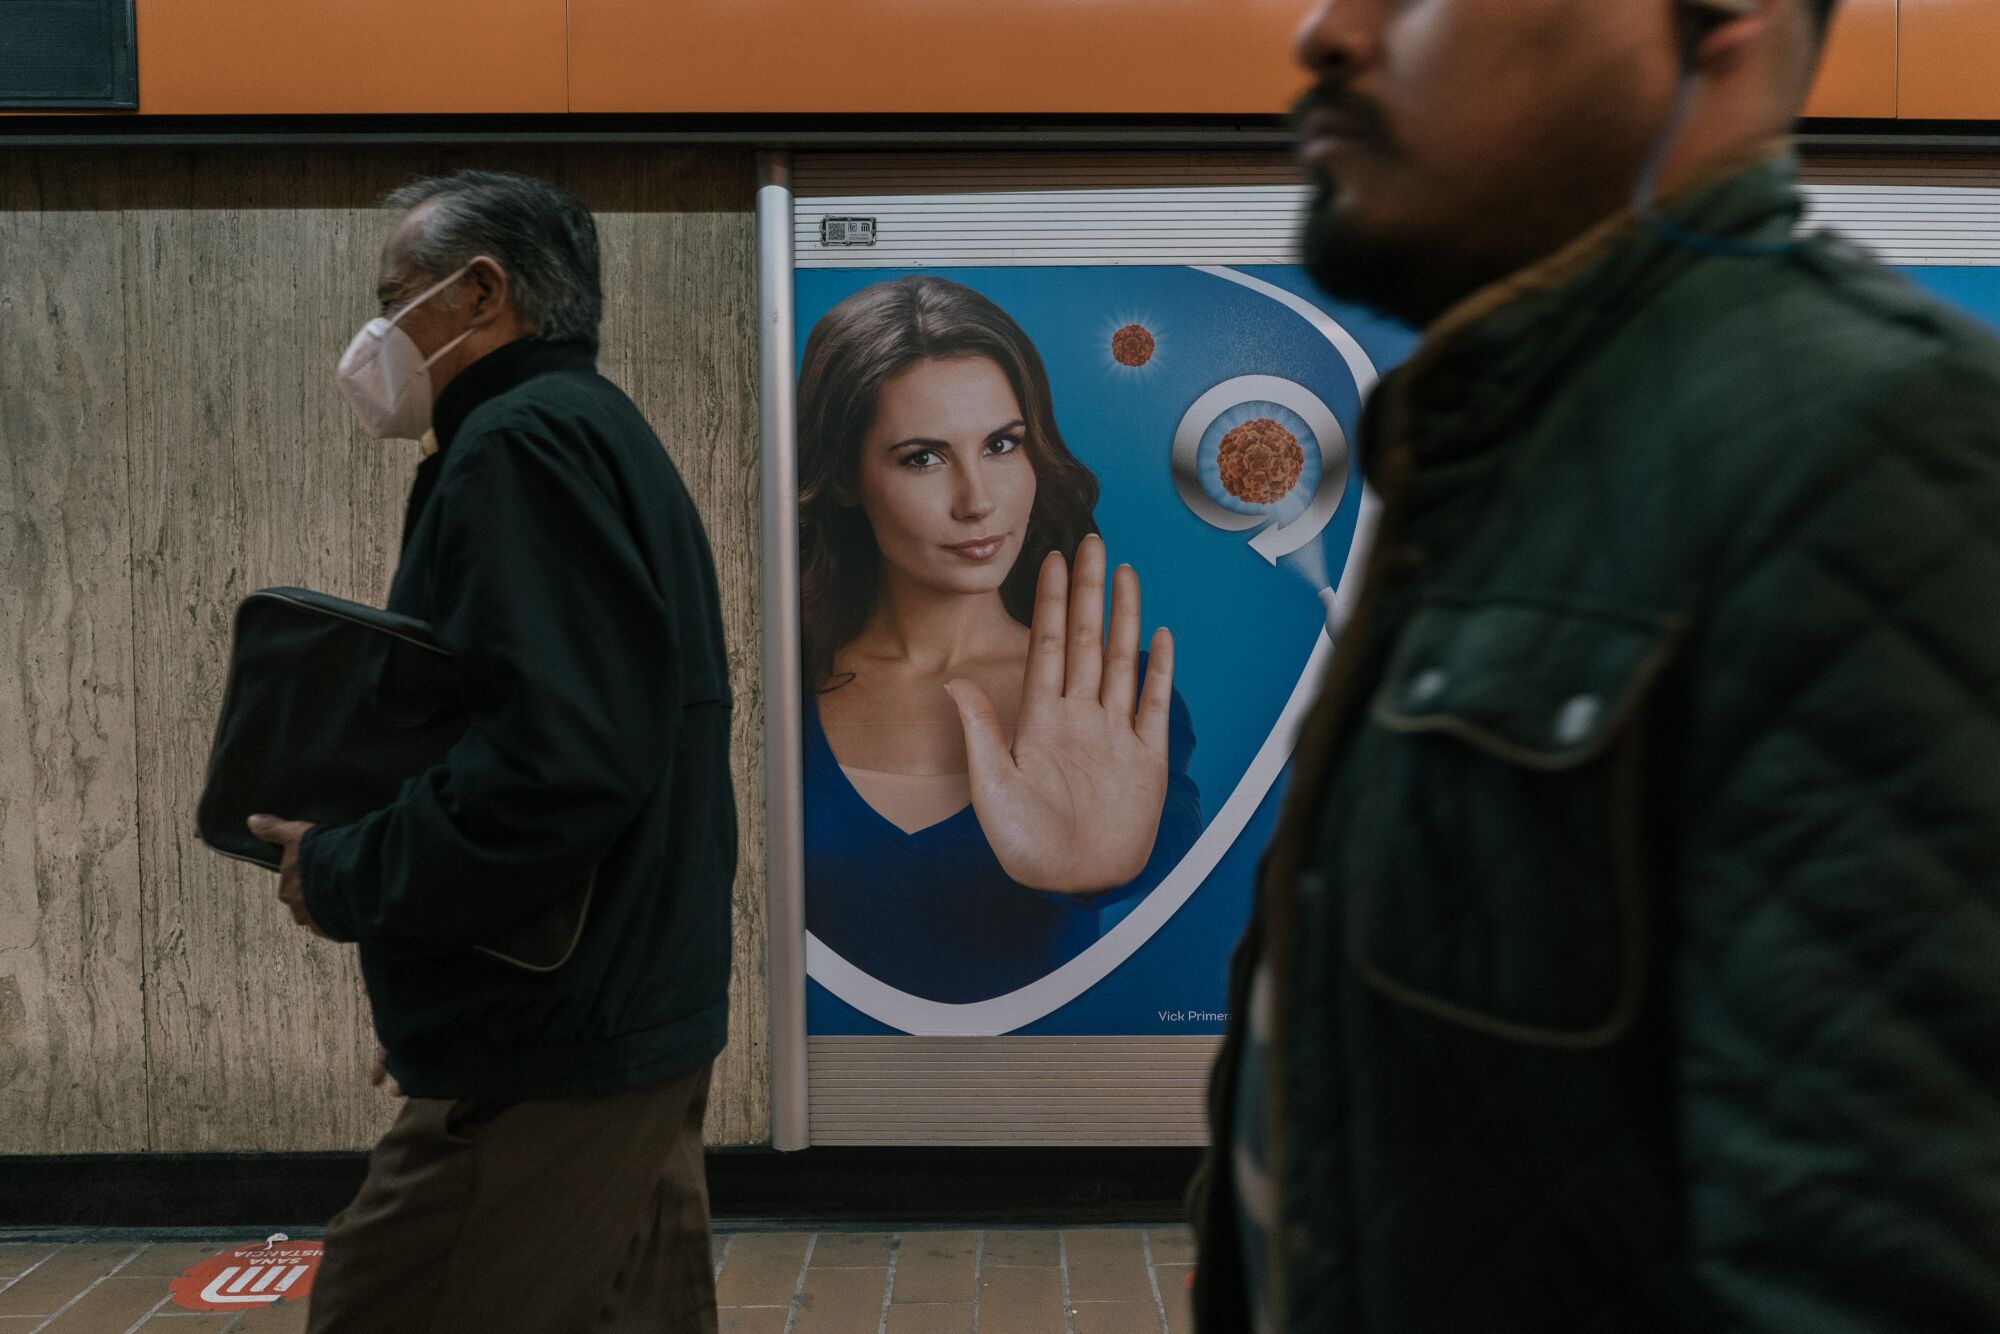 People in the subway in Mexico City pass by an ad picturing a light-skinned woman holding out her hand.